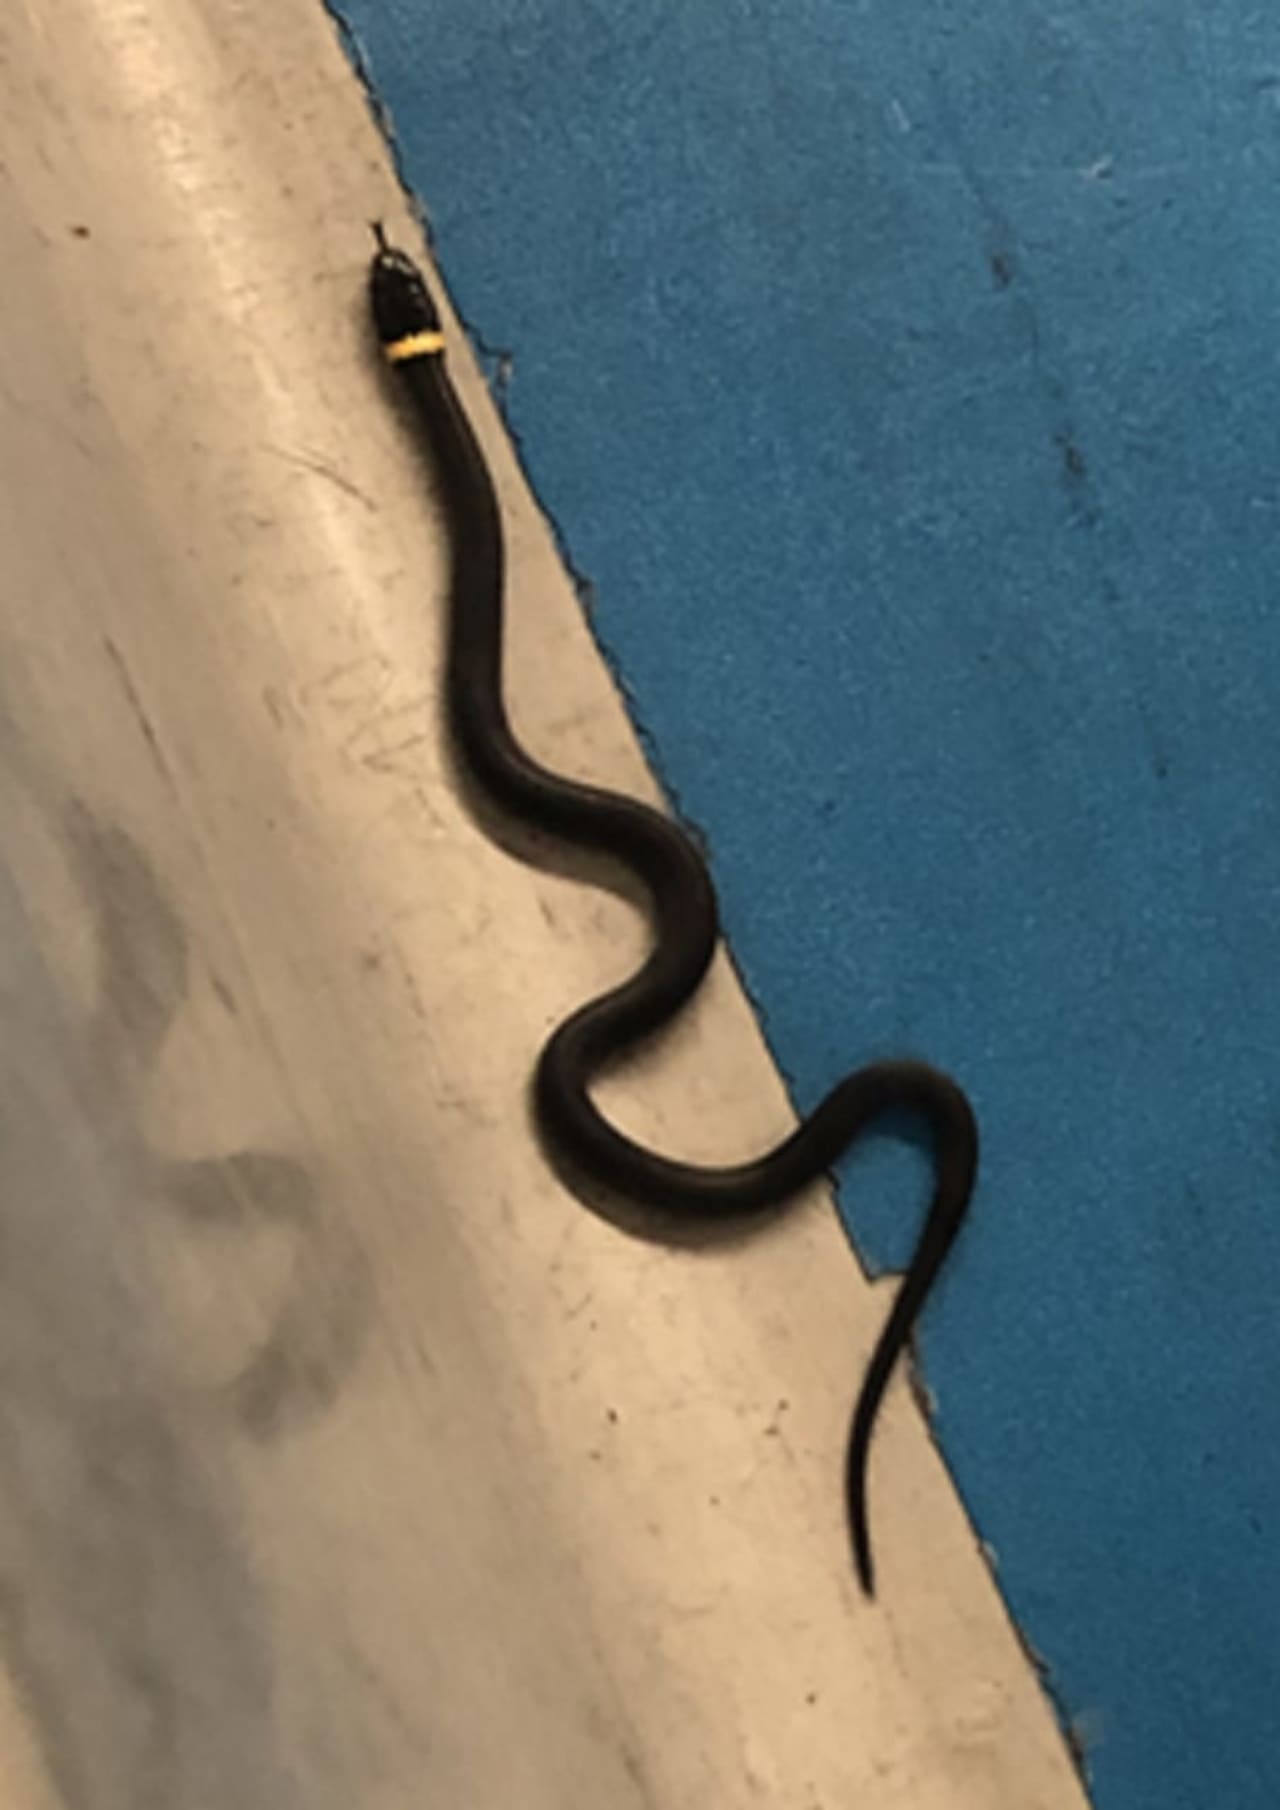 A 15-inch snake was found in Terminal C of Newark Airport Monday night.